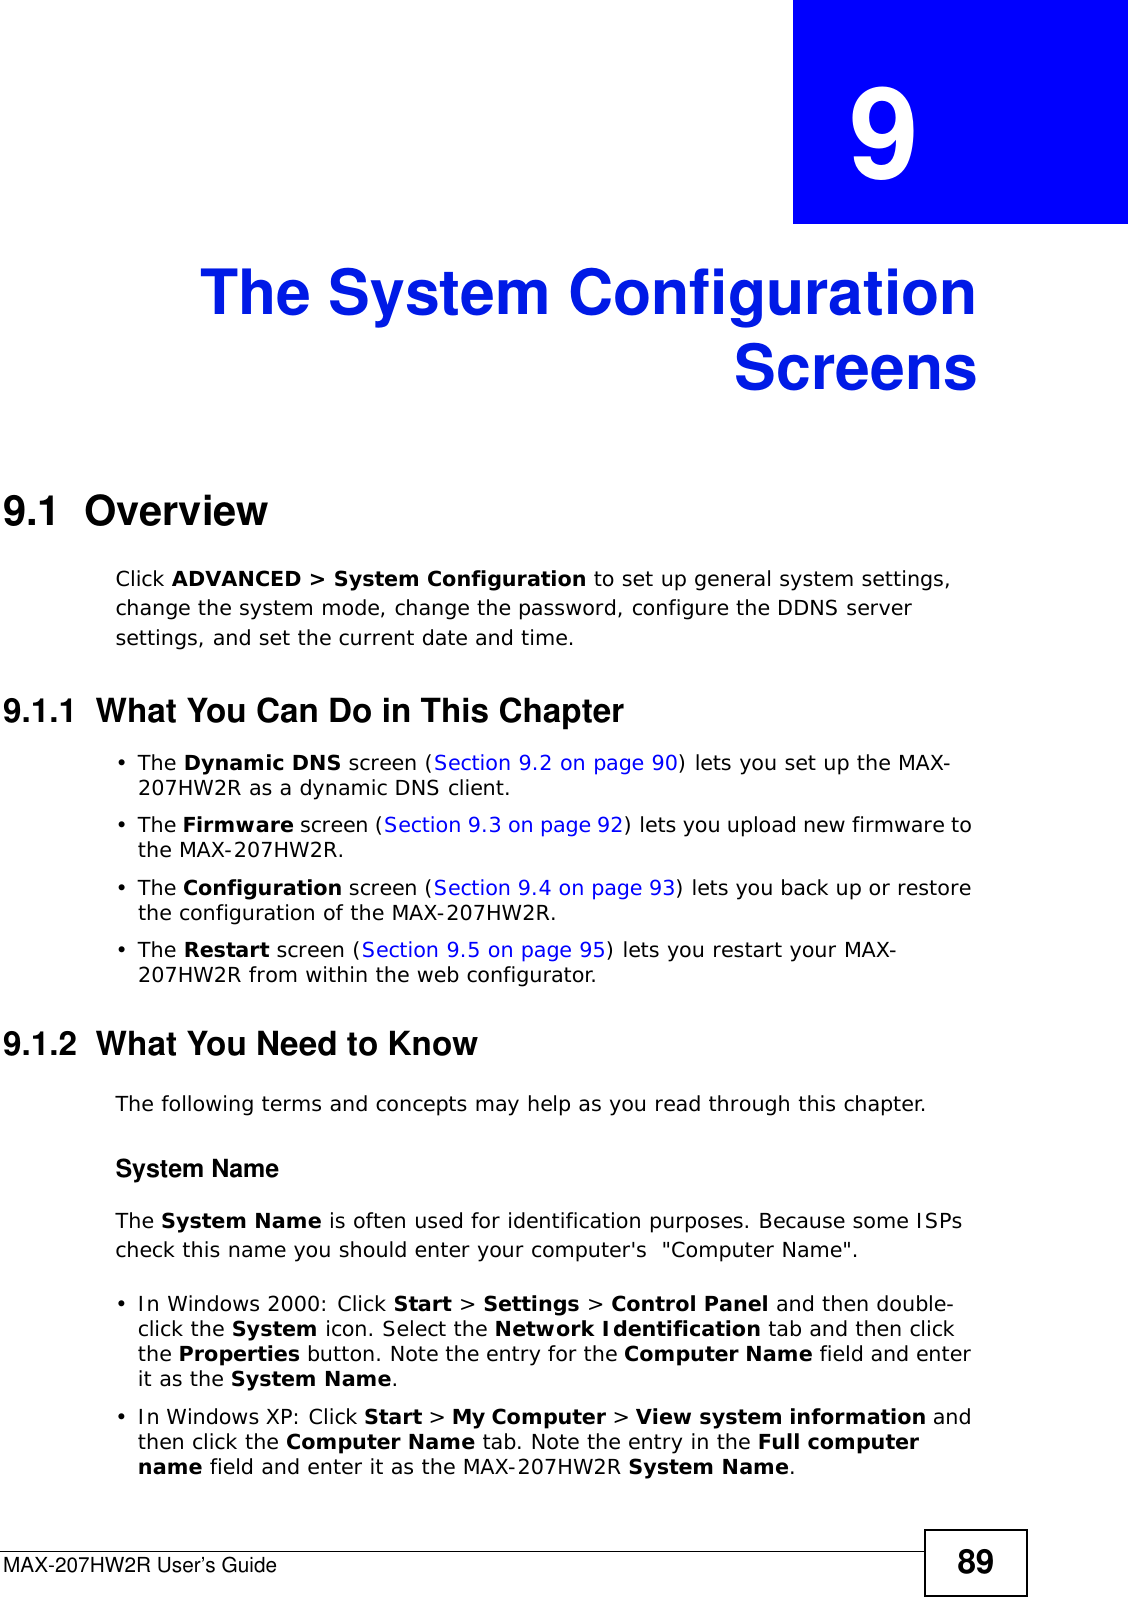 MAX-207HW2R User’s Guide 89CHAPTER  9 The System ConfigurationScreens9.1  OverviewClick ADVANCED &gt; System Configuration to set up general system settings, change the system mode, change the password, configure the DDNS server settings, and set the current date and time.9.1.1  What You Can Do in This Chapter•The Dynamic DNS screen (Section 9.2 on page 90) lets you set up the MAX-207HW2R as a dynamic DNS client.•The Firmware screen (Section 9.3 on page 92) lets you upload new firmware to the MAX-207HW2R.•The Configuration screen (Section 9.4 on page 93) lets you back up or restore the configuration of the MAX-207HW2R.•The Restart screen (Section 9.5 on page 95) lets you restart your MAX-207HW2R from within the web configurator.9.1.2  What You Need to KnowThe following terms and concepts may help as you read through this chapter.System NameThe System Name is often used for identification purposes. Because some ISPs check this name you should enter your computer&apos;s  &quot;Computer Name&quot;. • In Windows 2000: Click Start &gt; Settings &gt; Control Panel and then double-click the System icon. Select the Network Identification tab and then click the Properties button. Note the entry for the Computer Name field and enter it as the System Name.• In Windows XP: Click Start &gt; My Computer &gt; View system information and then click the Computer Name tab. Note the entry in the Full computer name field and enter it as the MAX-207HW2R System Name.